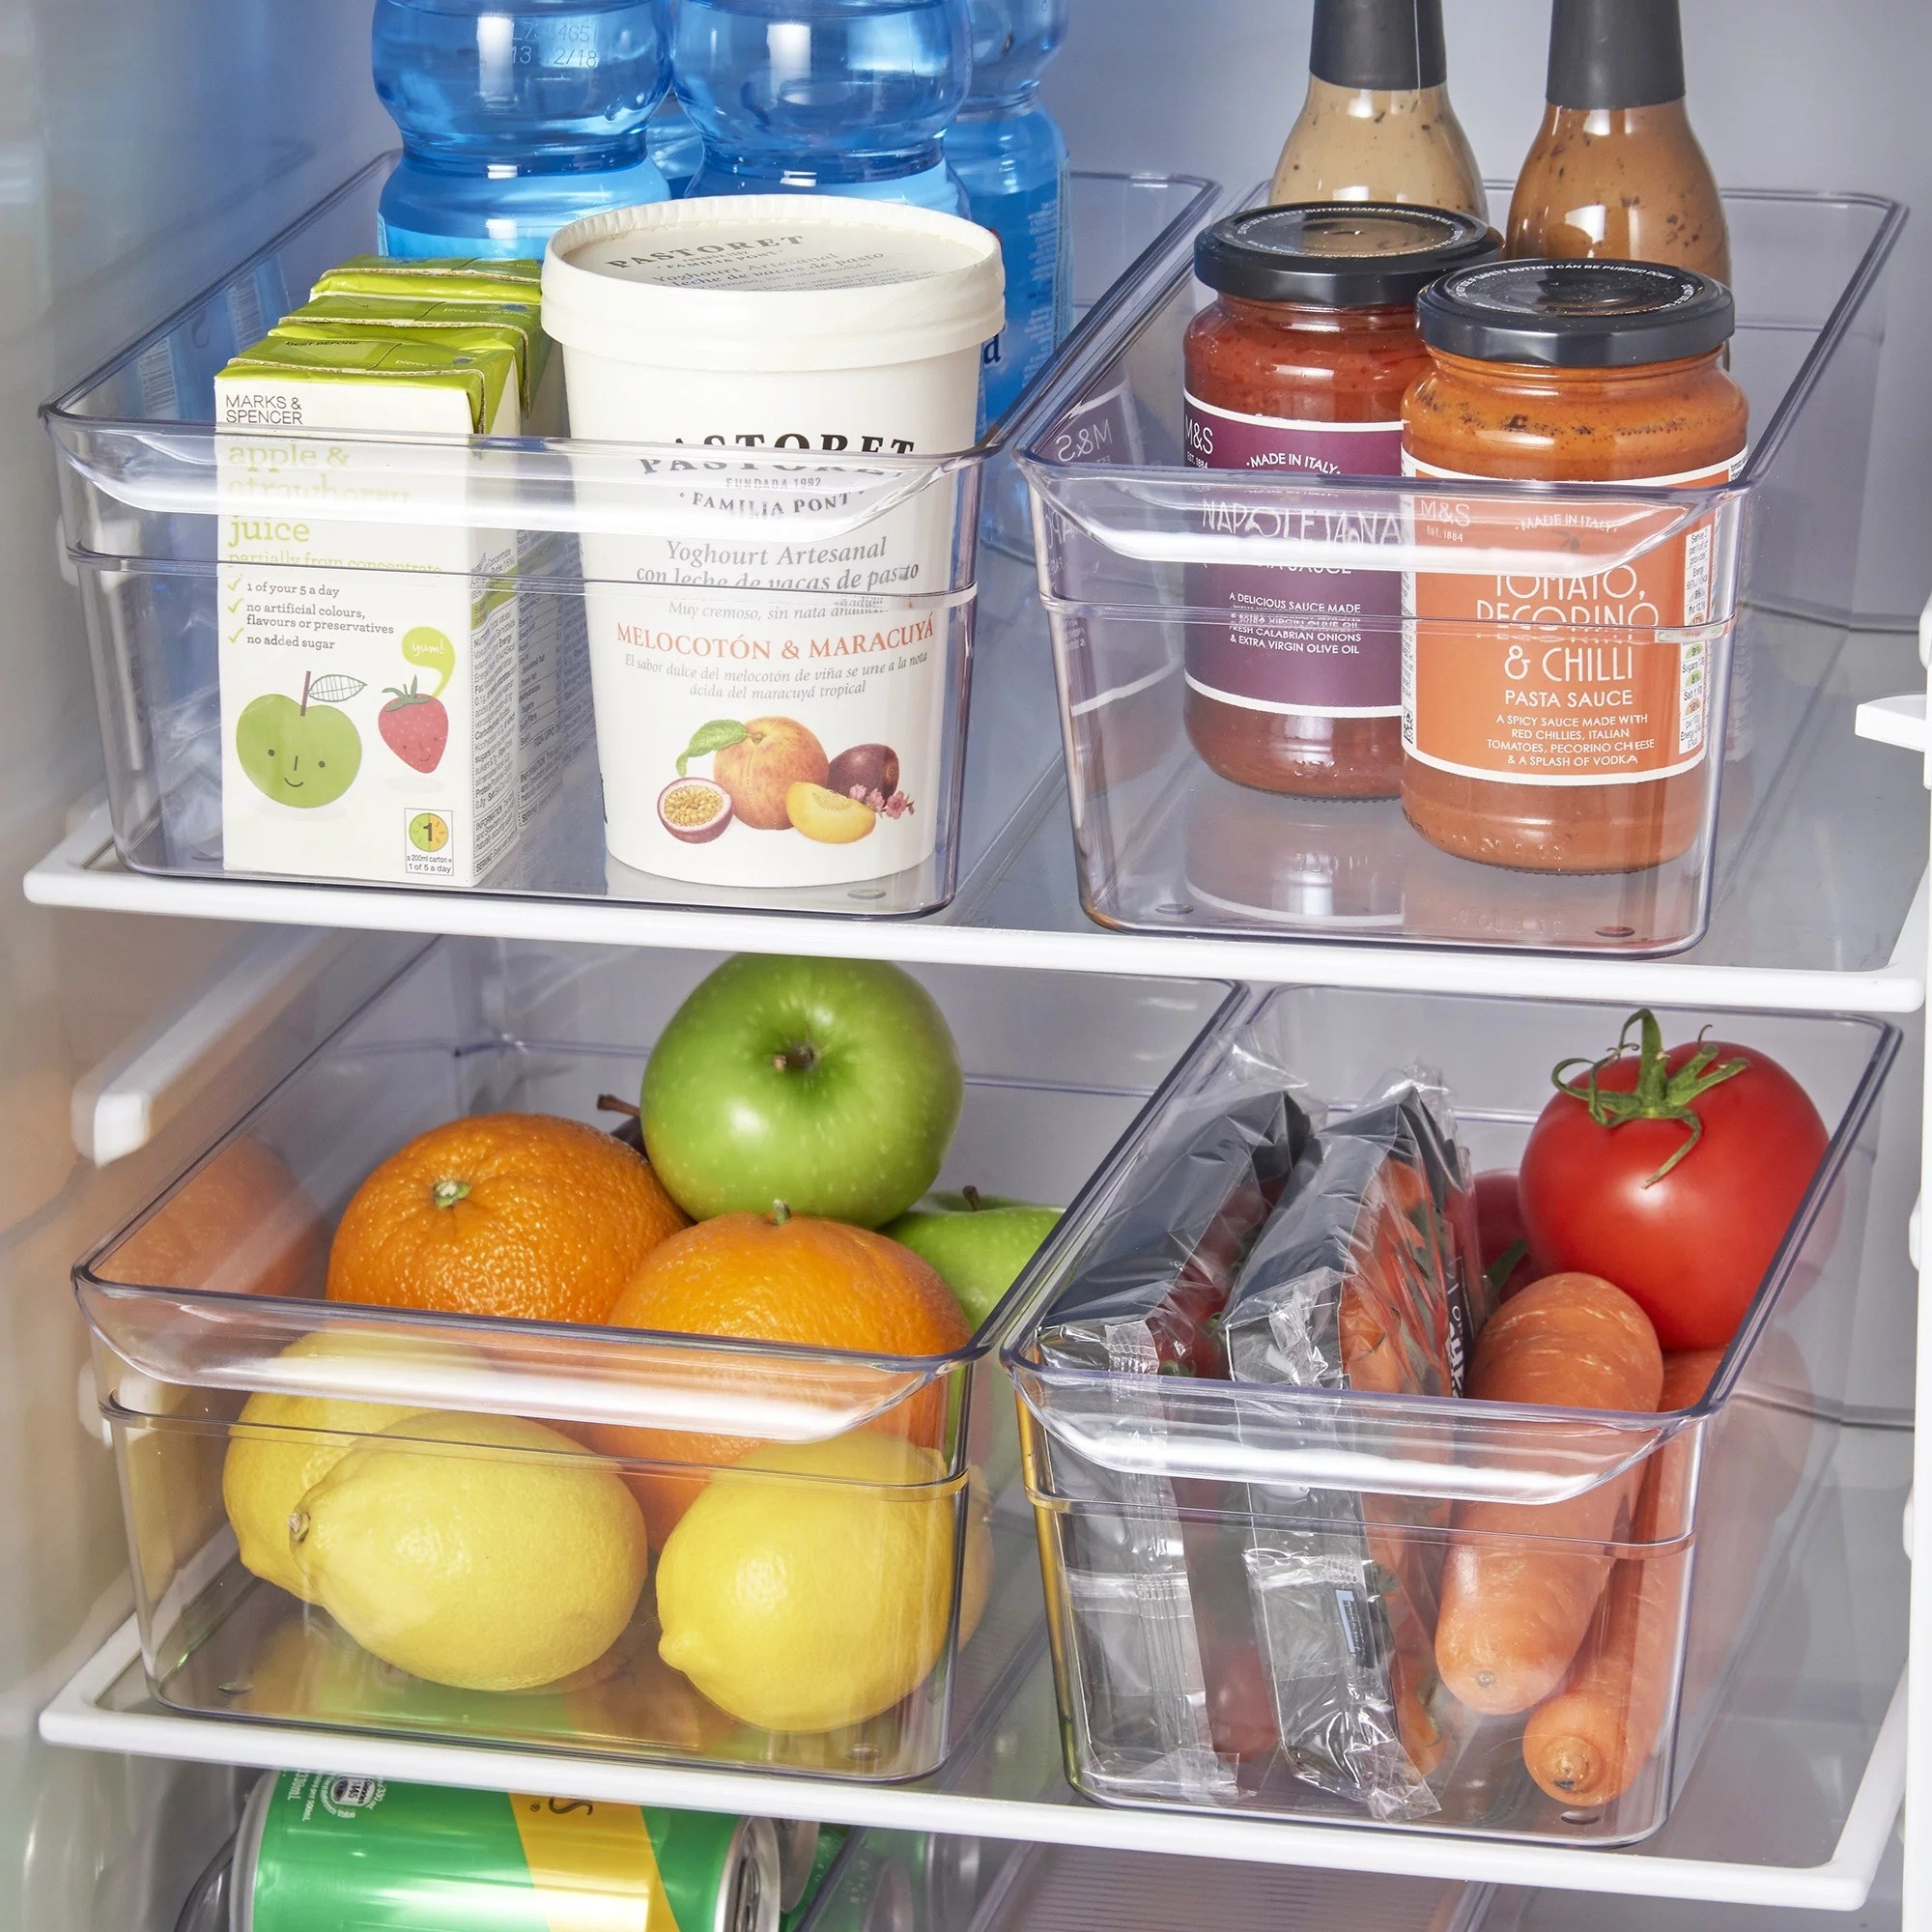 The clear storage bins holding various items in a refrigerator